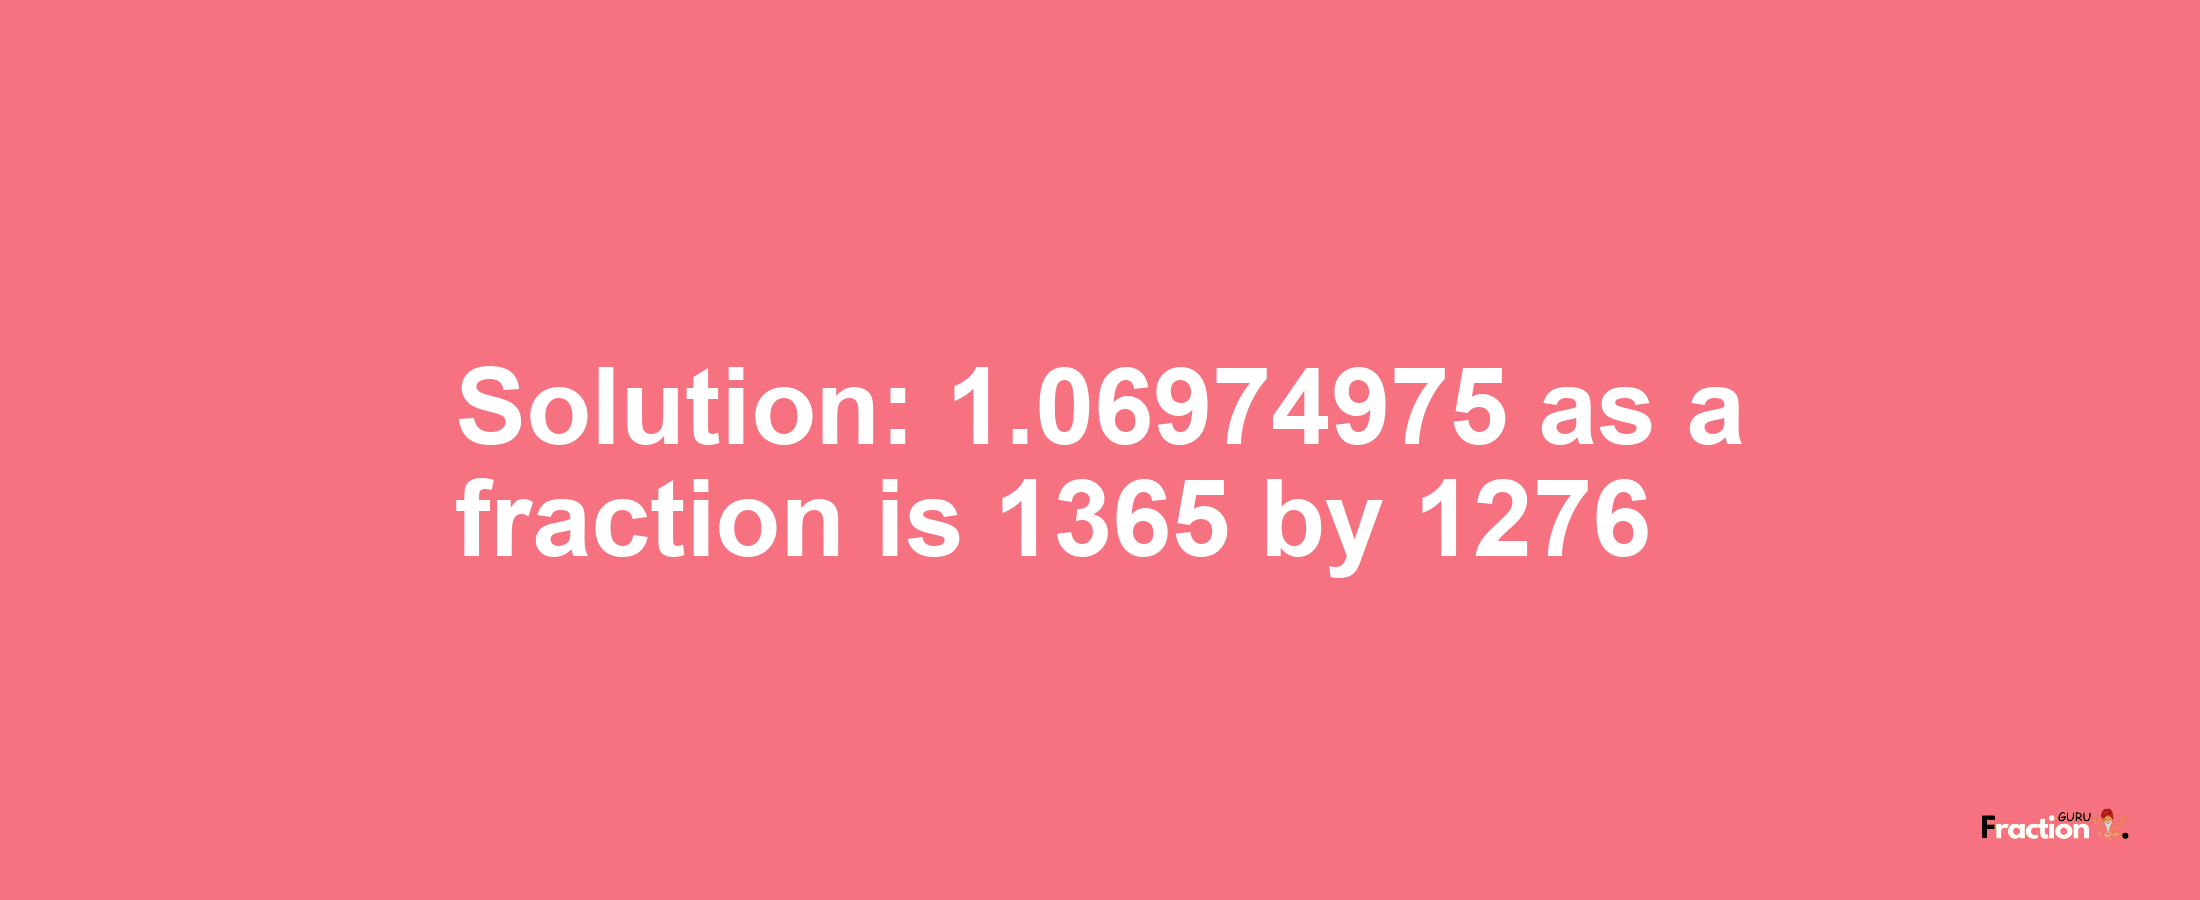 Solution:1.06974975 as a fraction is 1365/1276